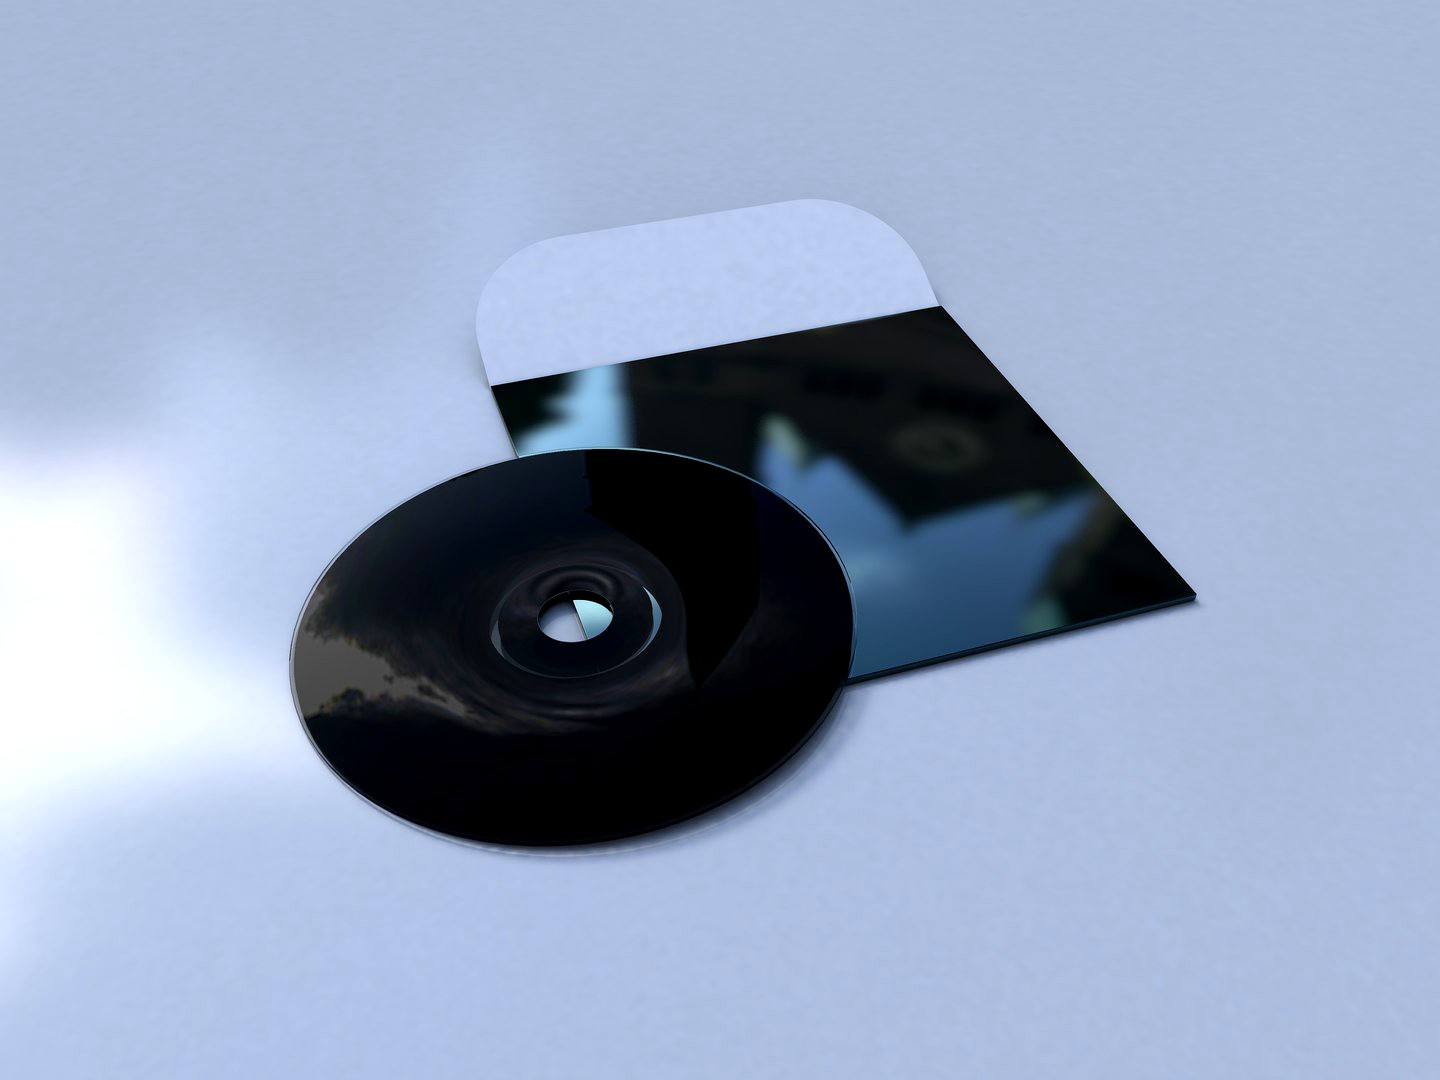 vinyl compact disk with cover